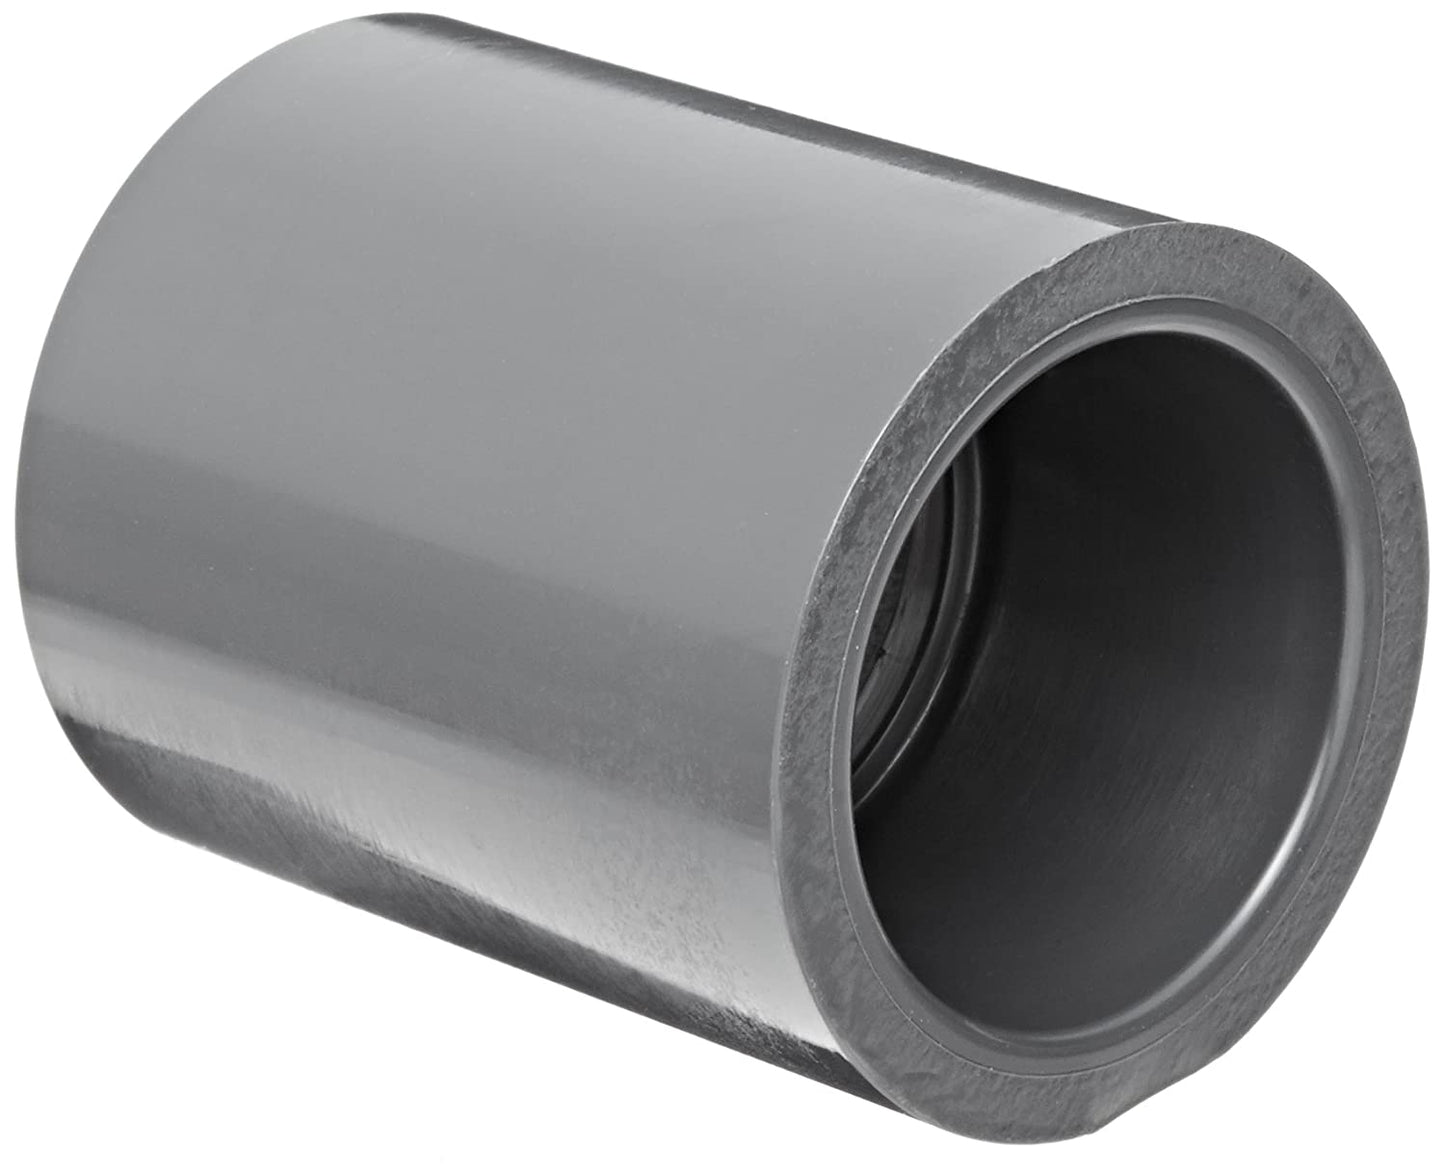 829-040 - PVC Pipe Fitting, Coupling, Schedule 80, 4" Socket